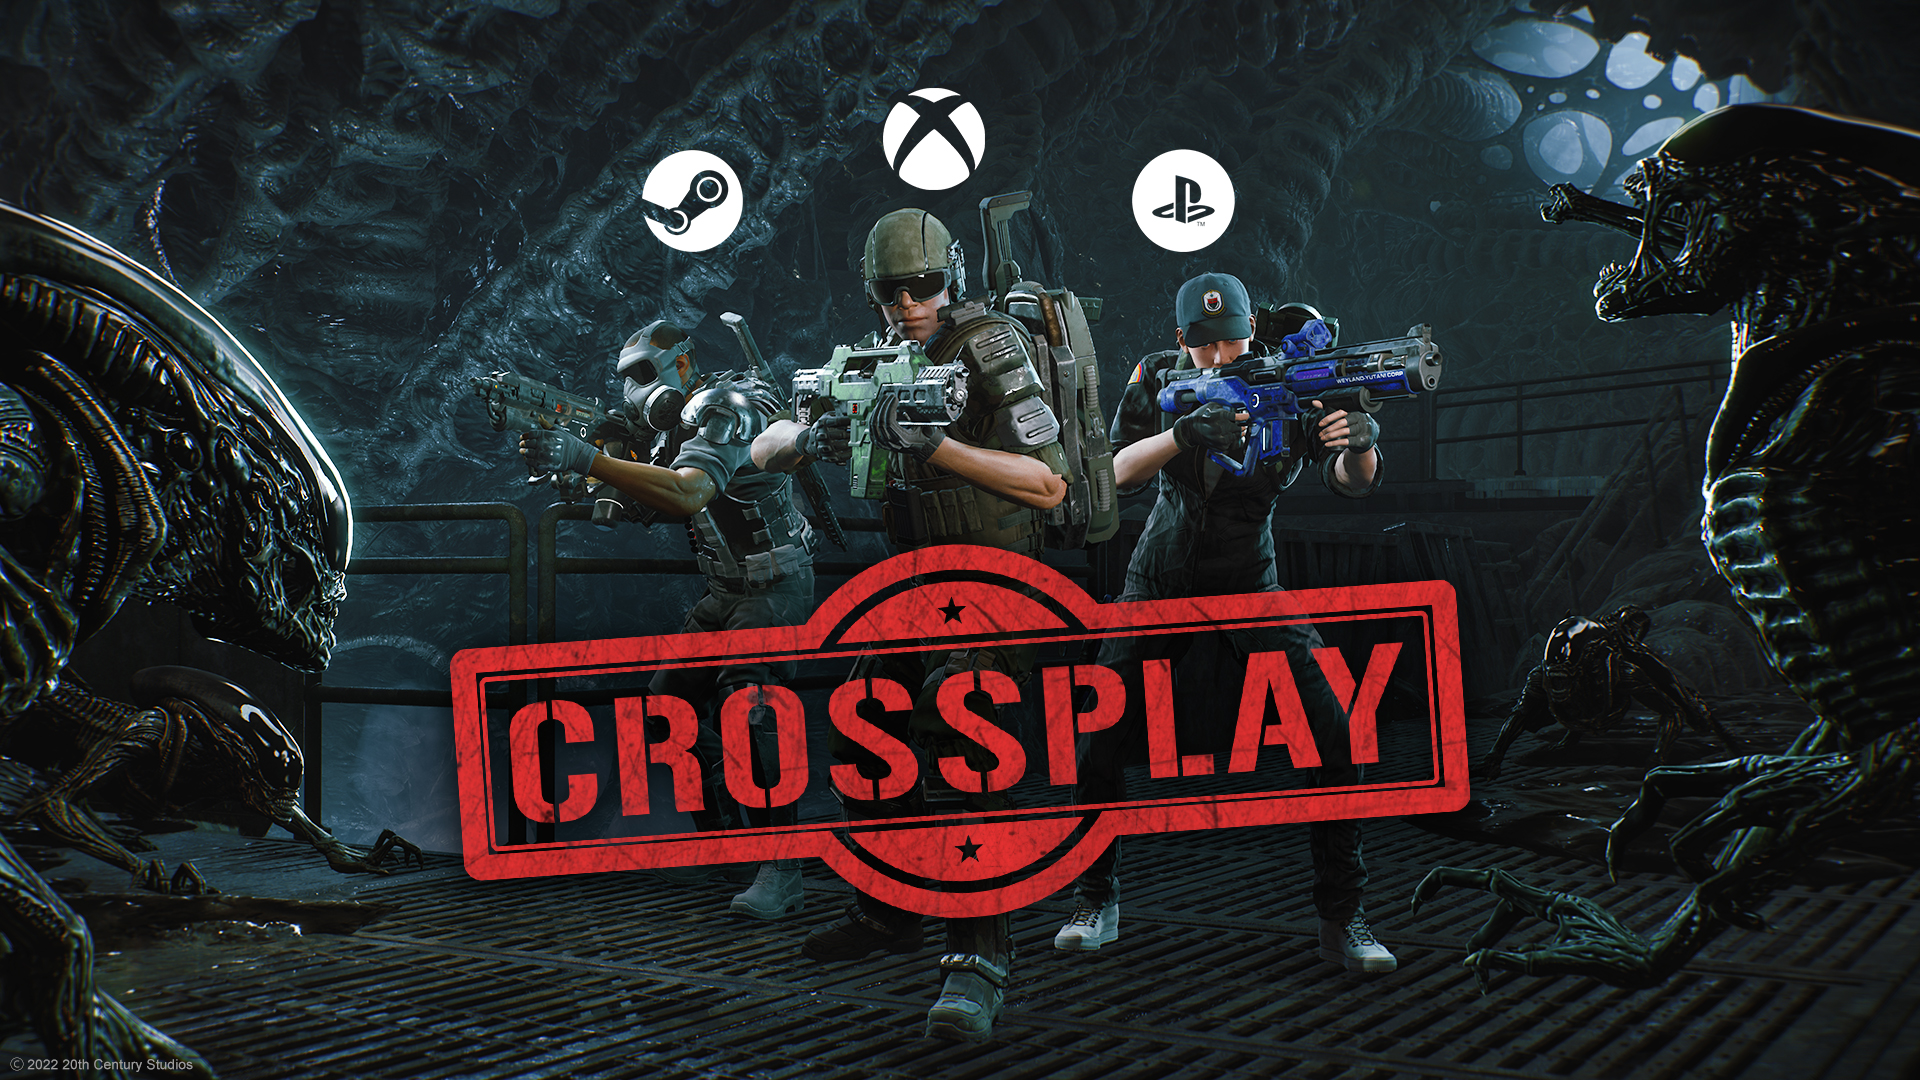 Crossplay, A New Game Mode, New Progression System & More Coming July 26th!